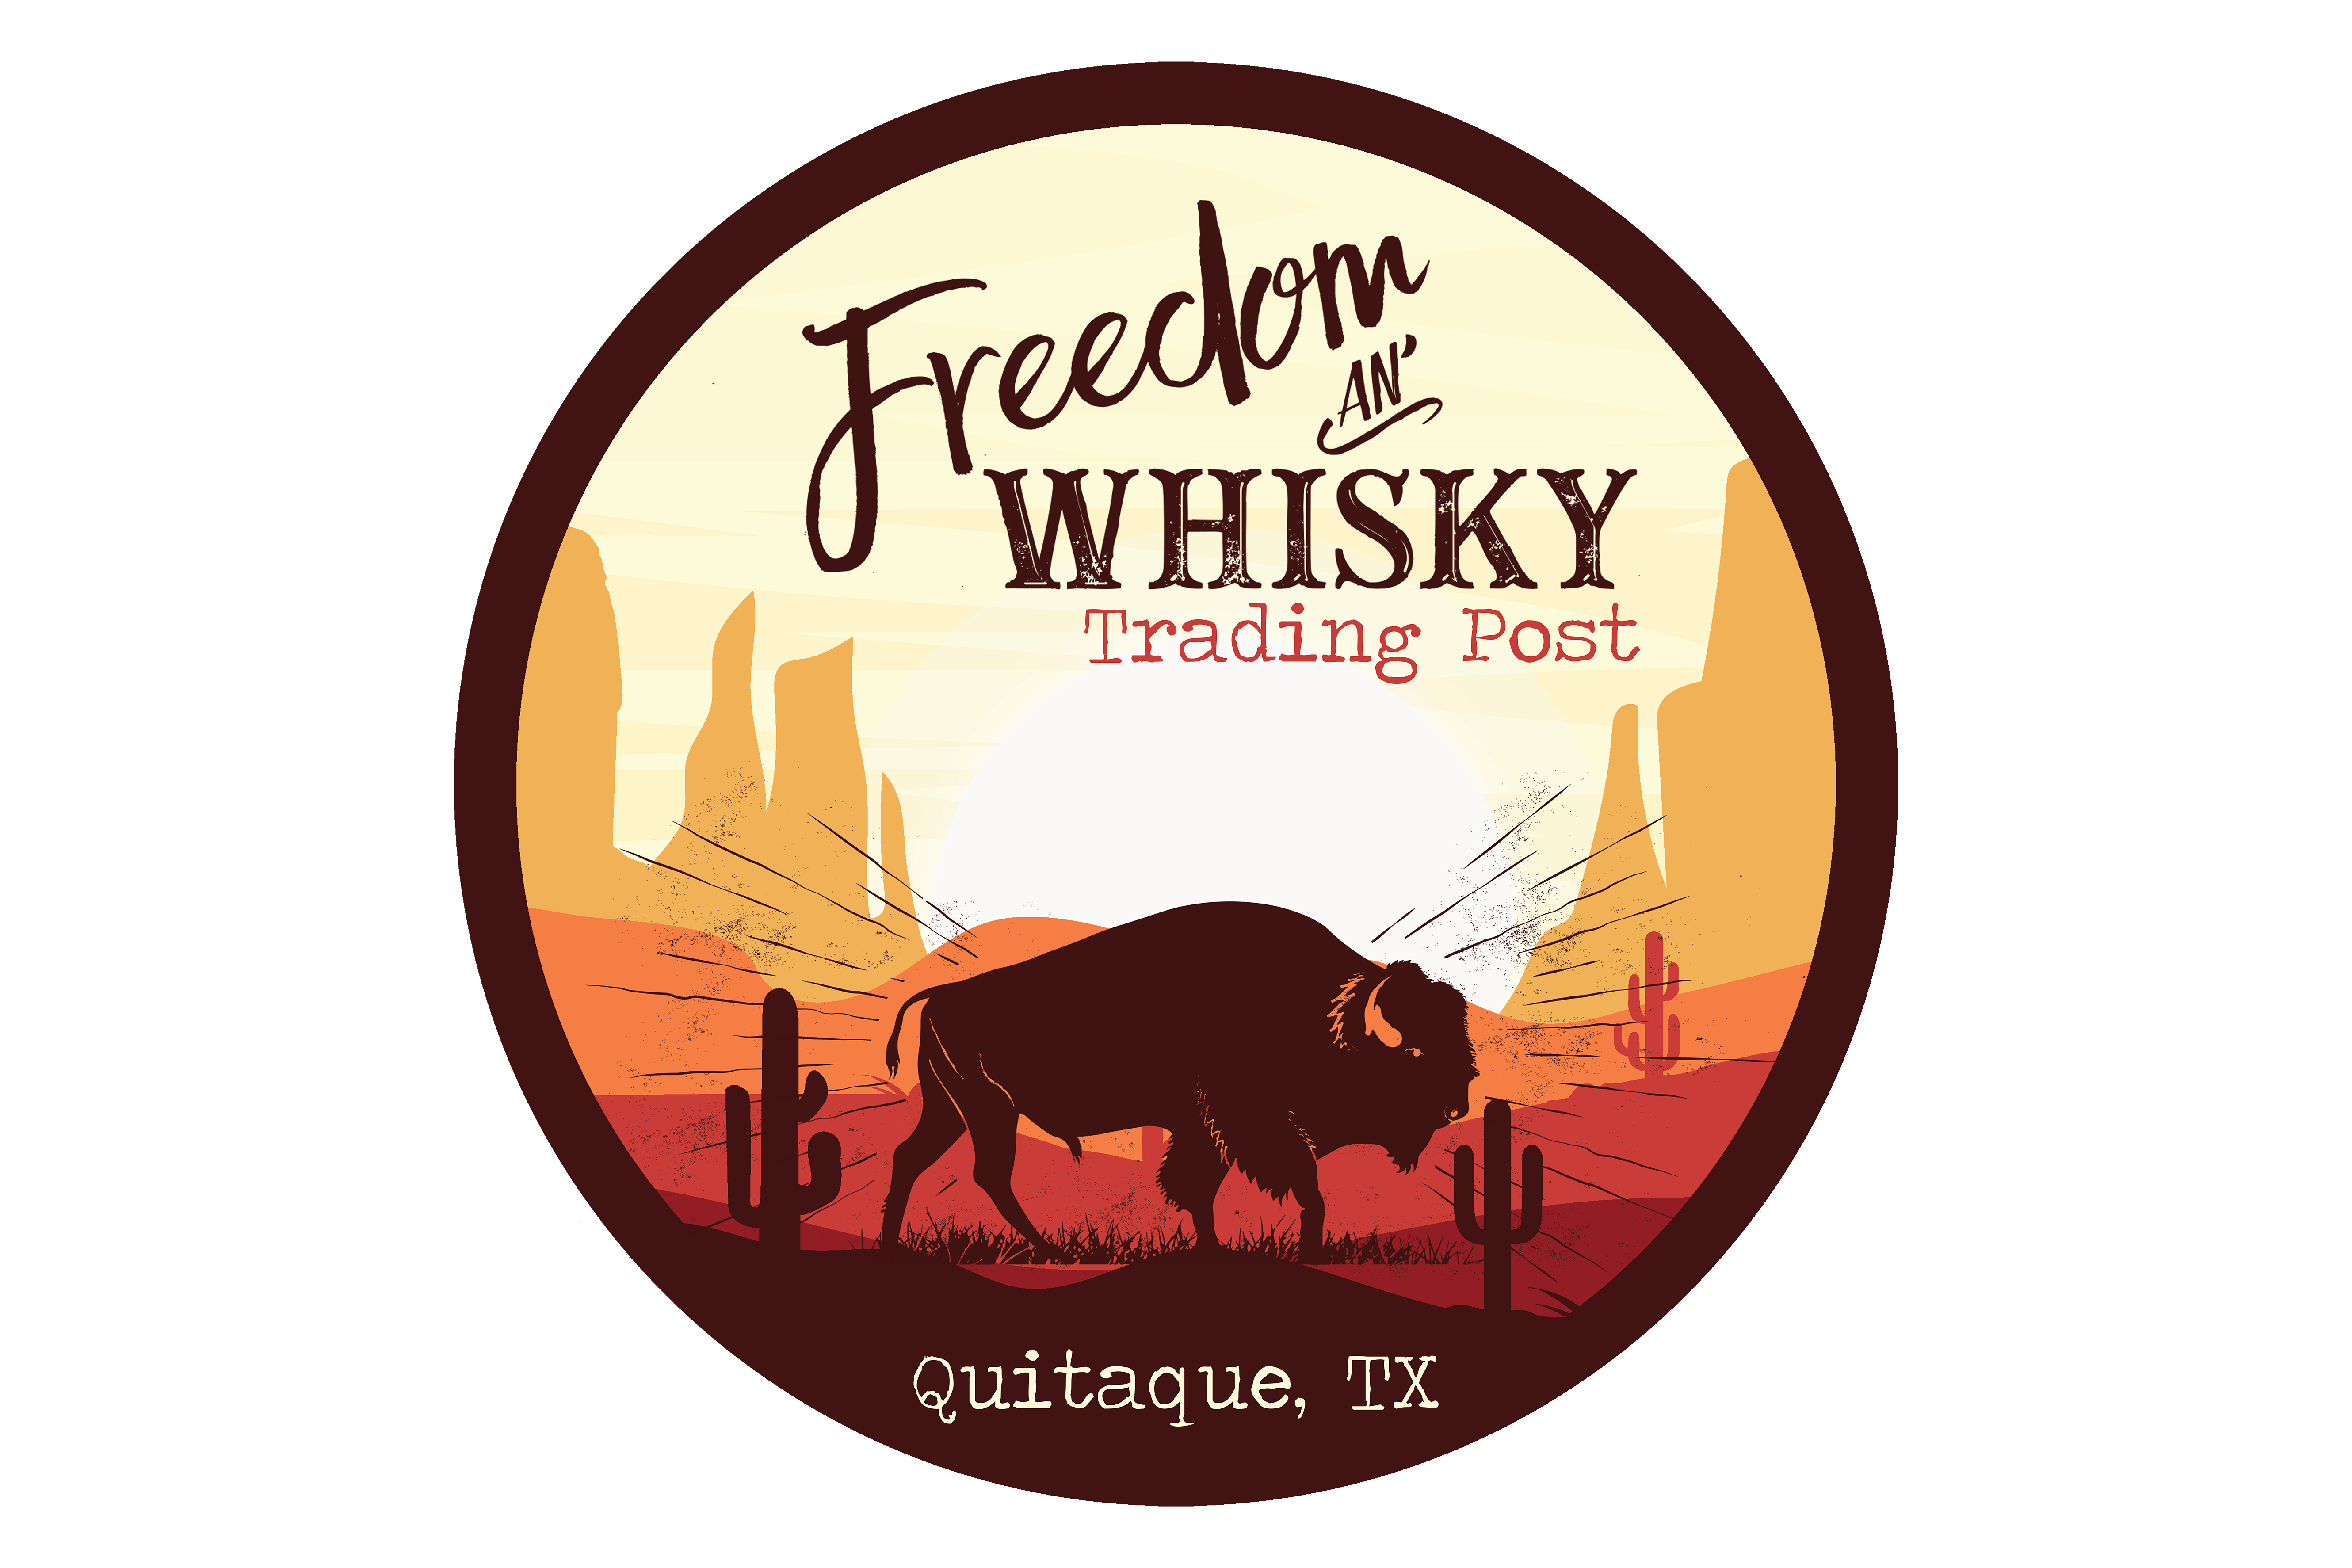 Freedom An' Whisky